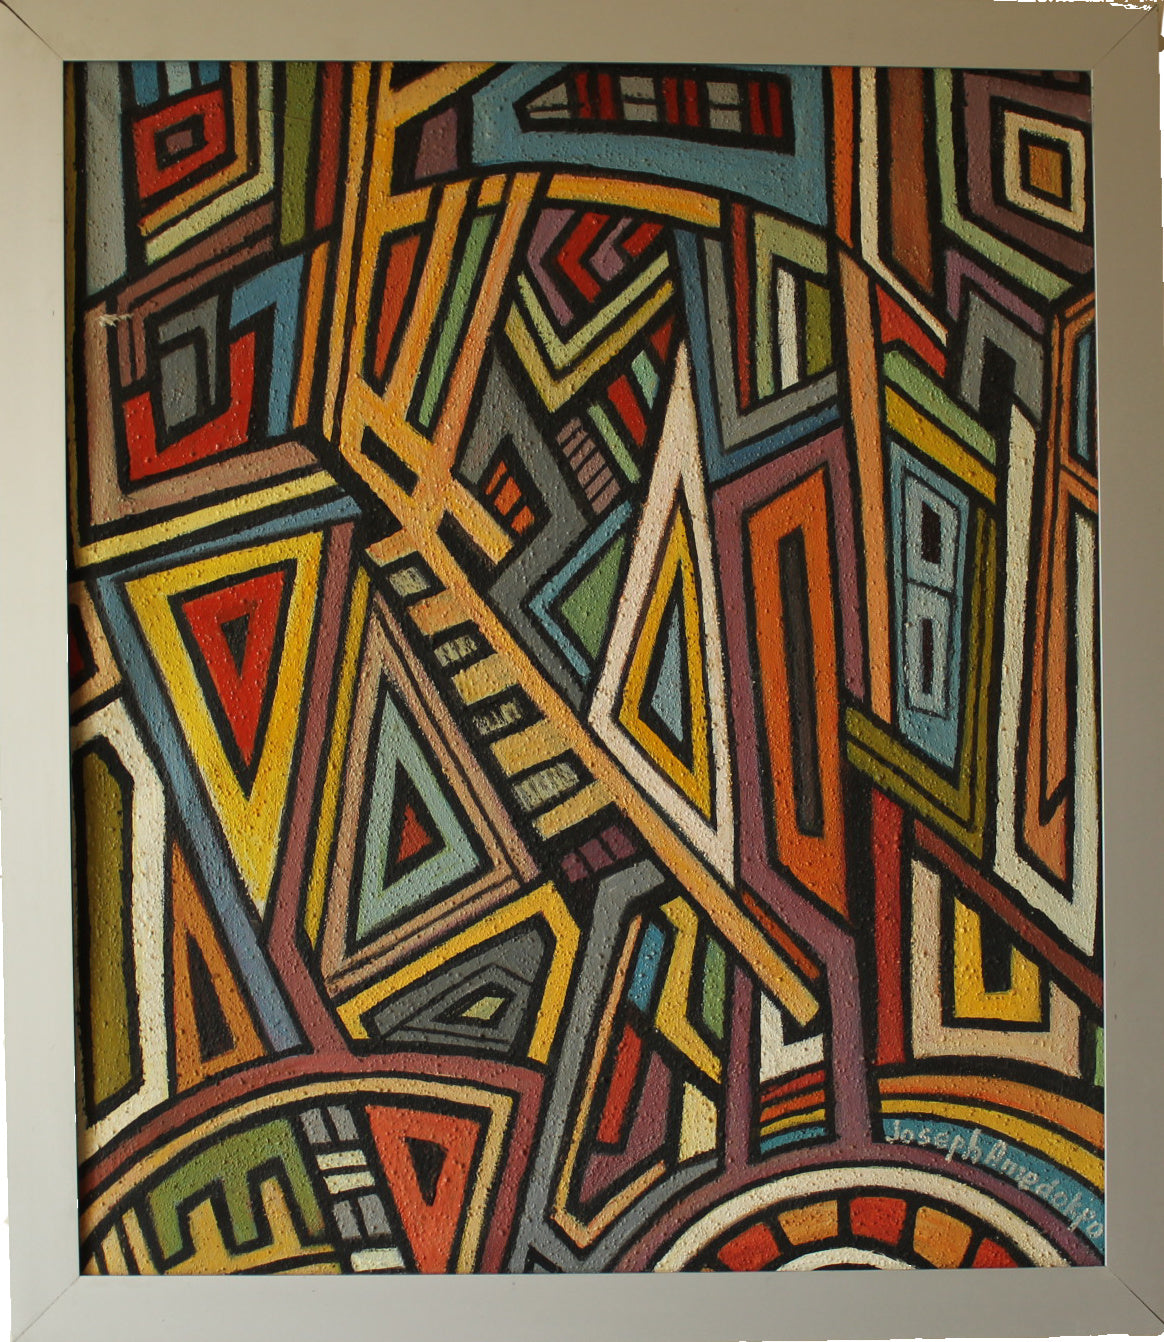 Silver framed Oil painting "Bird Kingdom" - Contemporary and Colorful Ensemble-African apparel and accessories